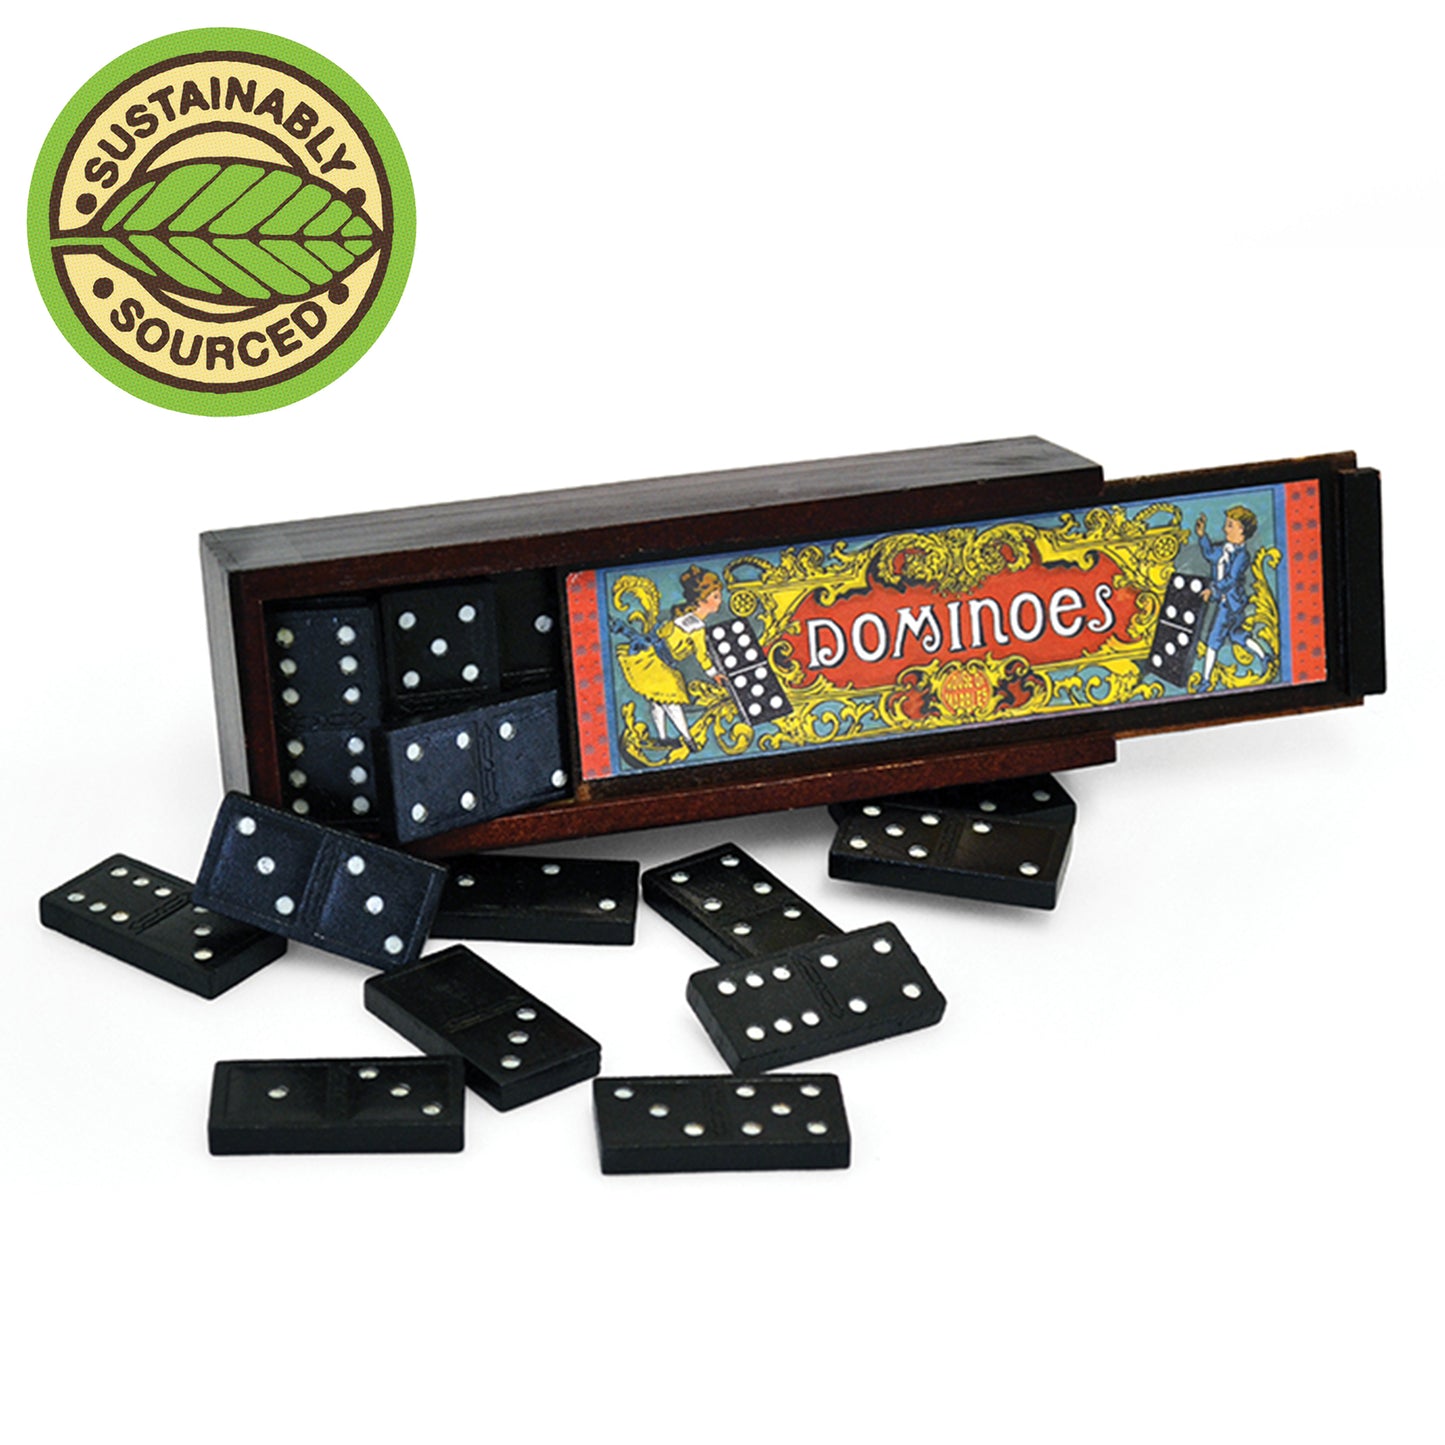 Traditional Dominoes in a Wooden Box